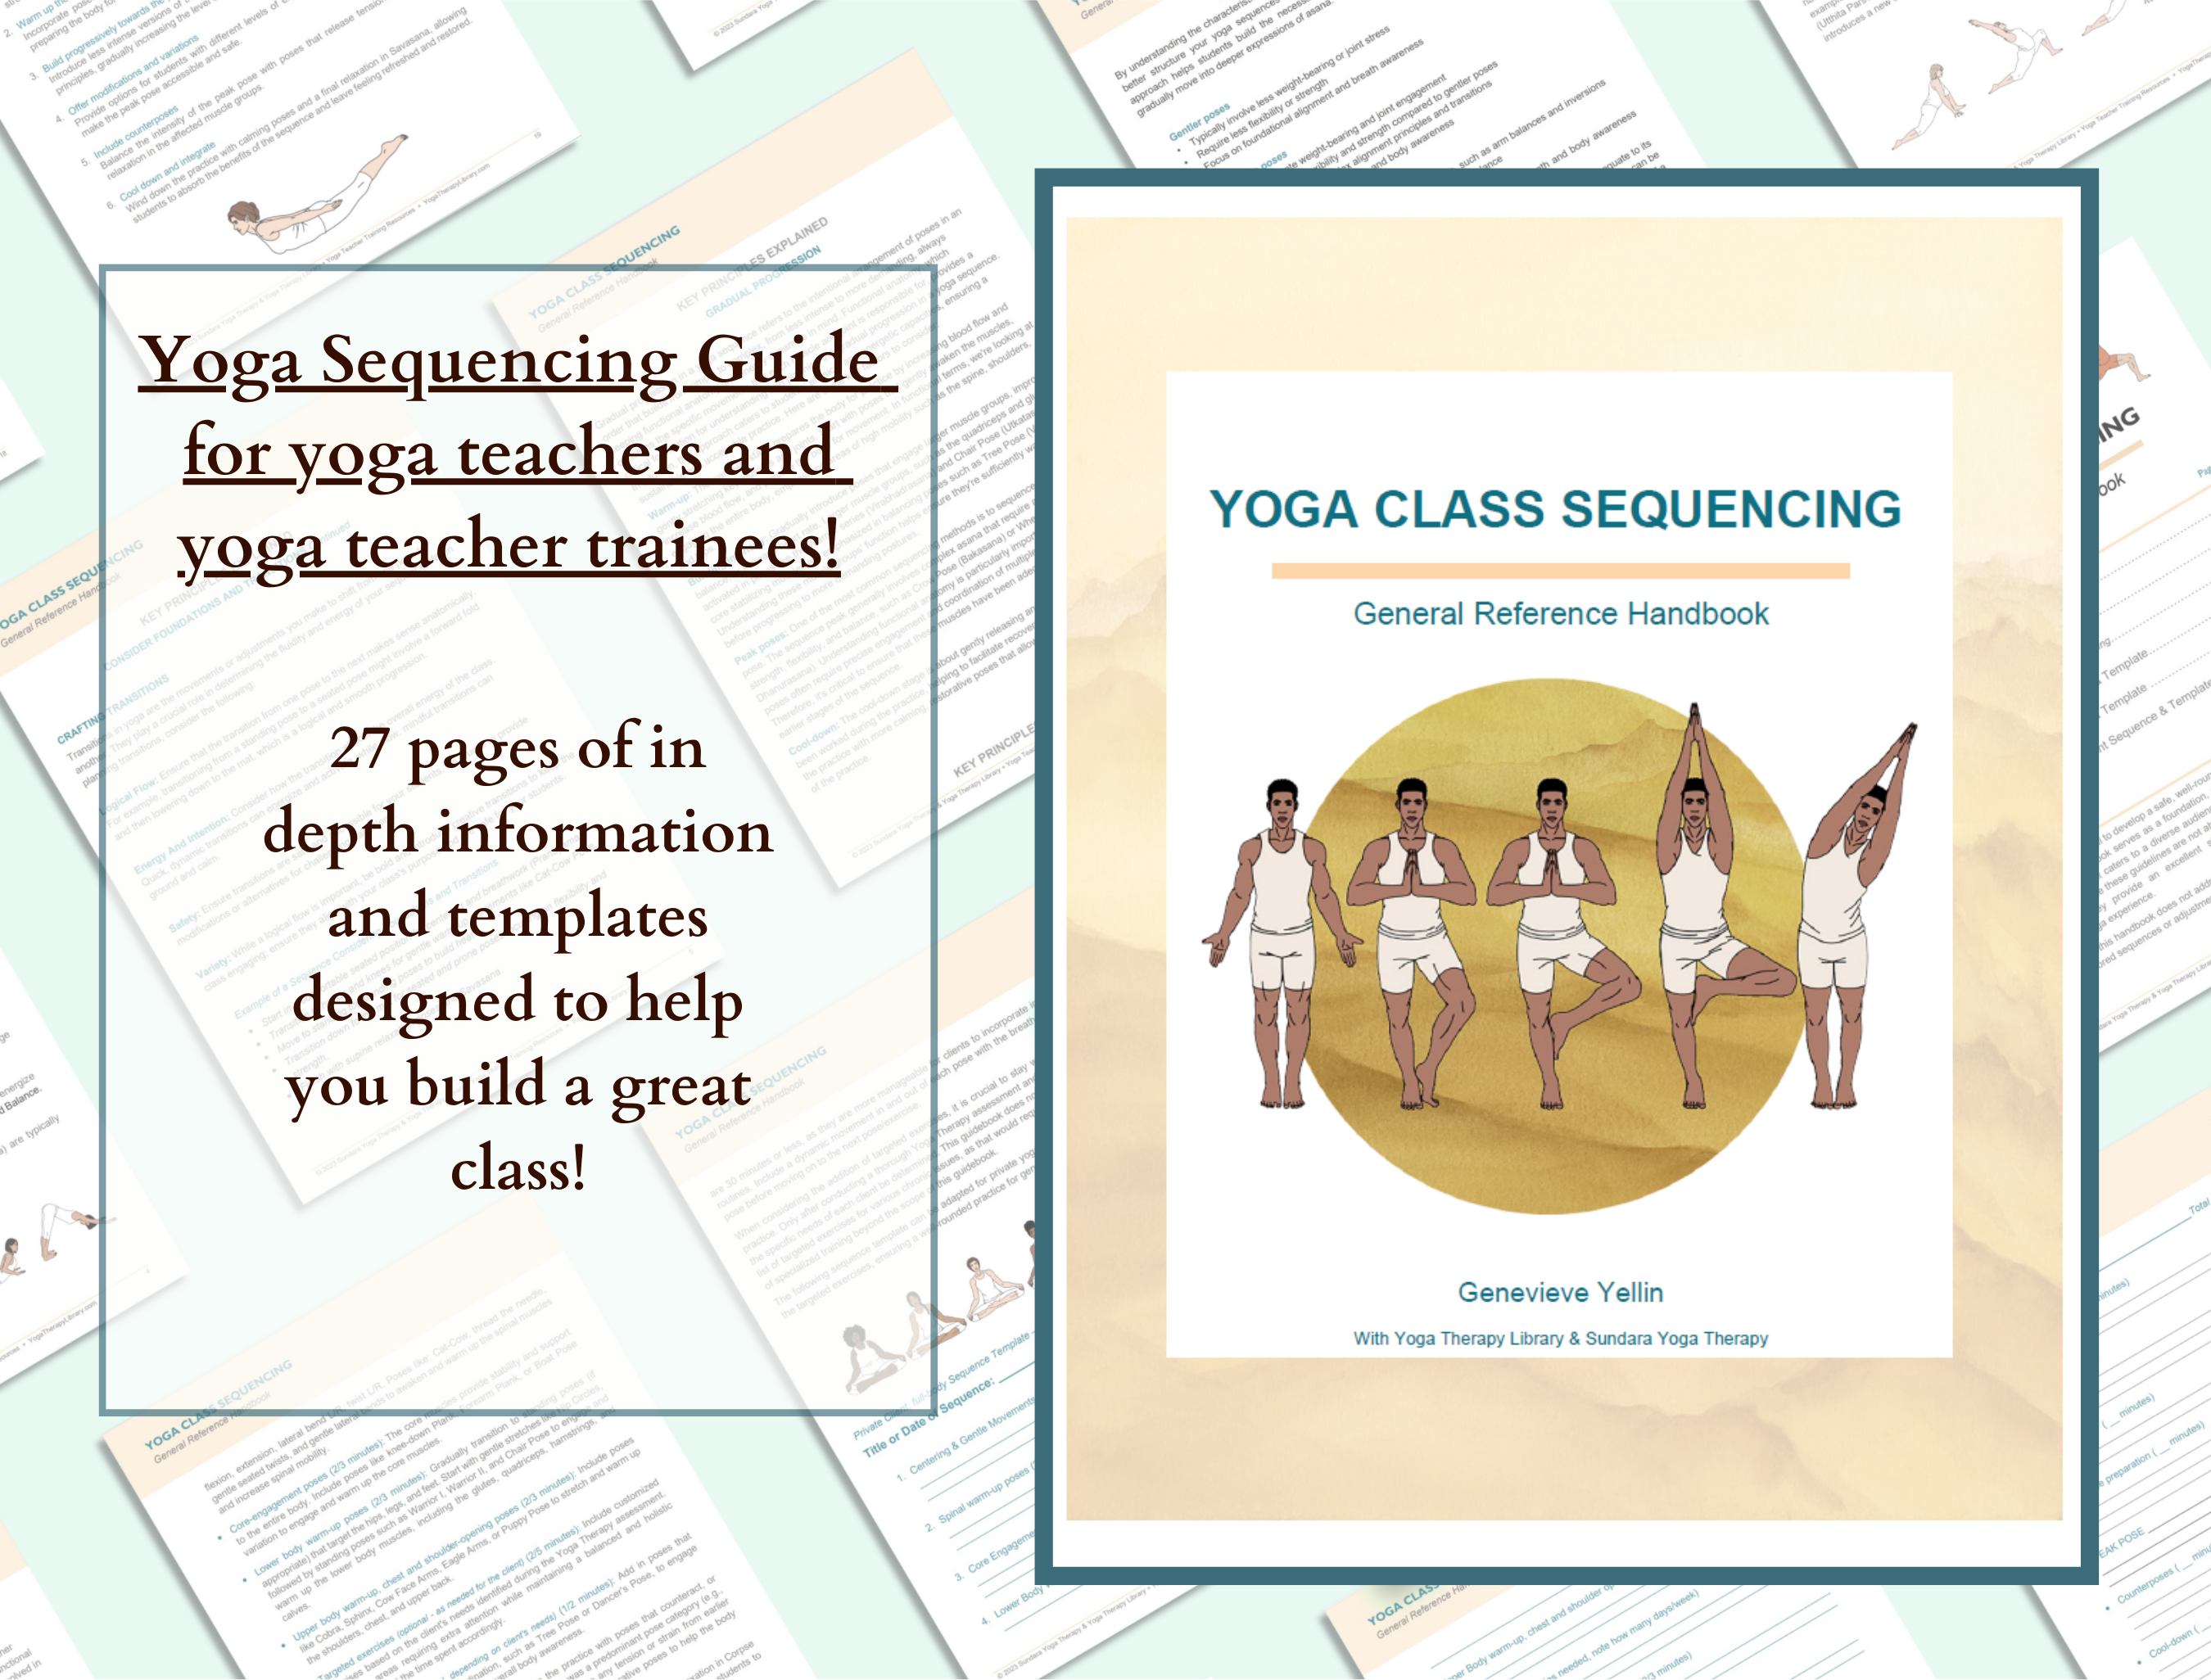 Principles of Sequencing: How to Plan Yoga Class to Energize or Relax